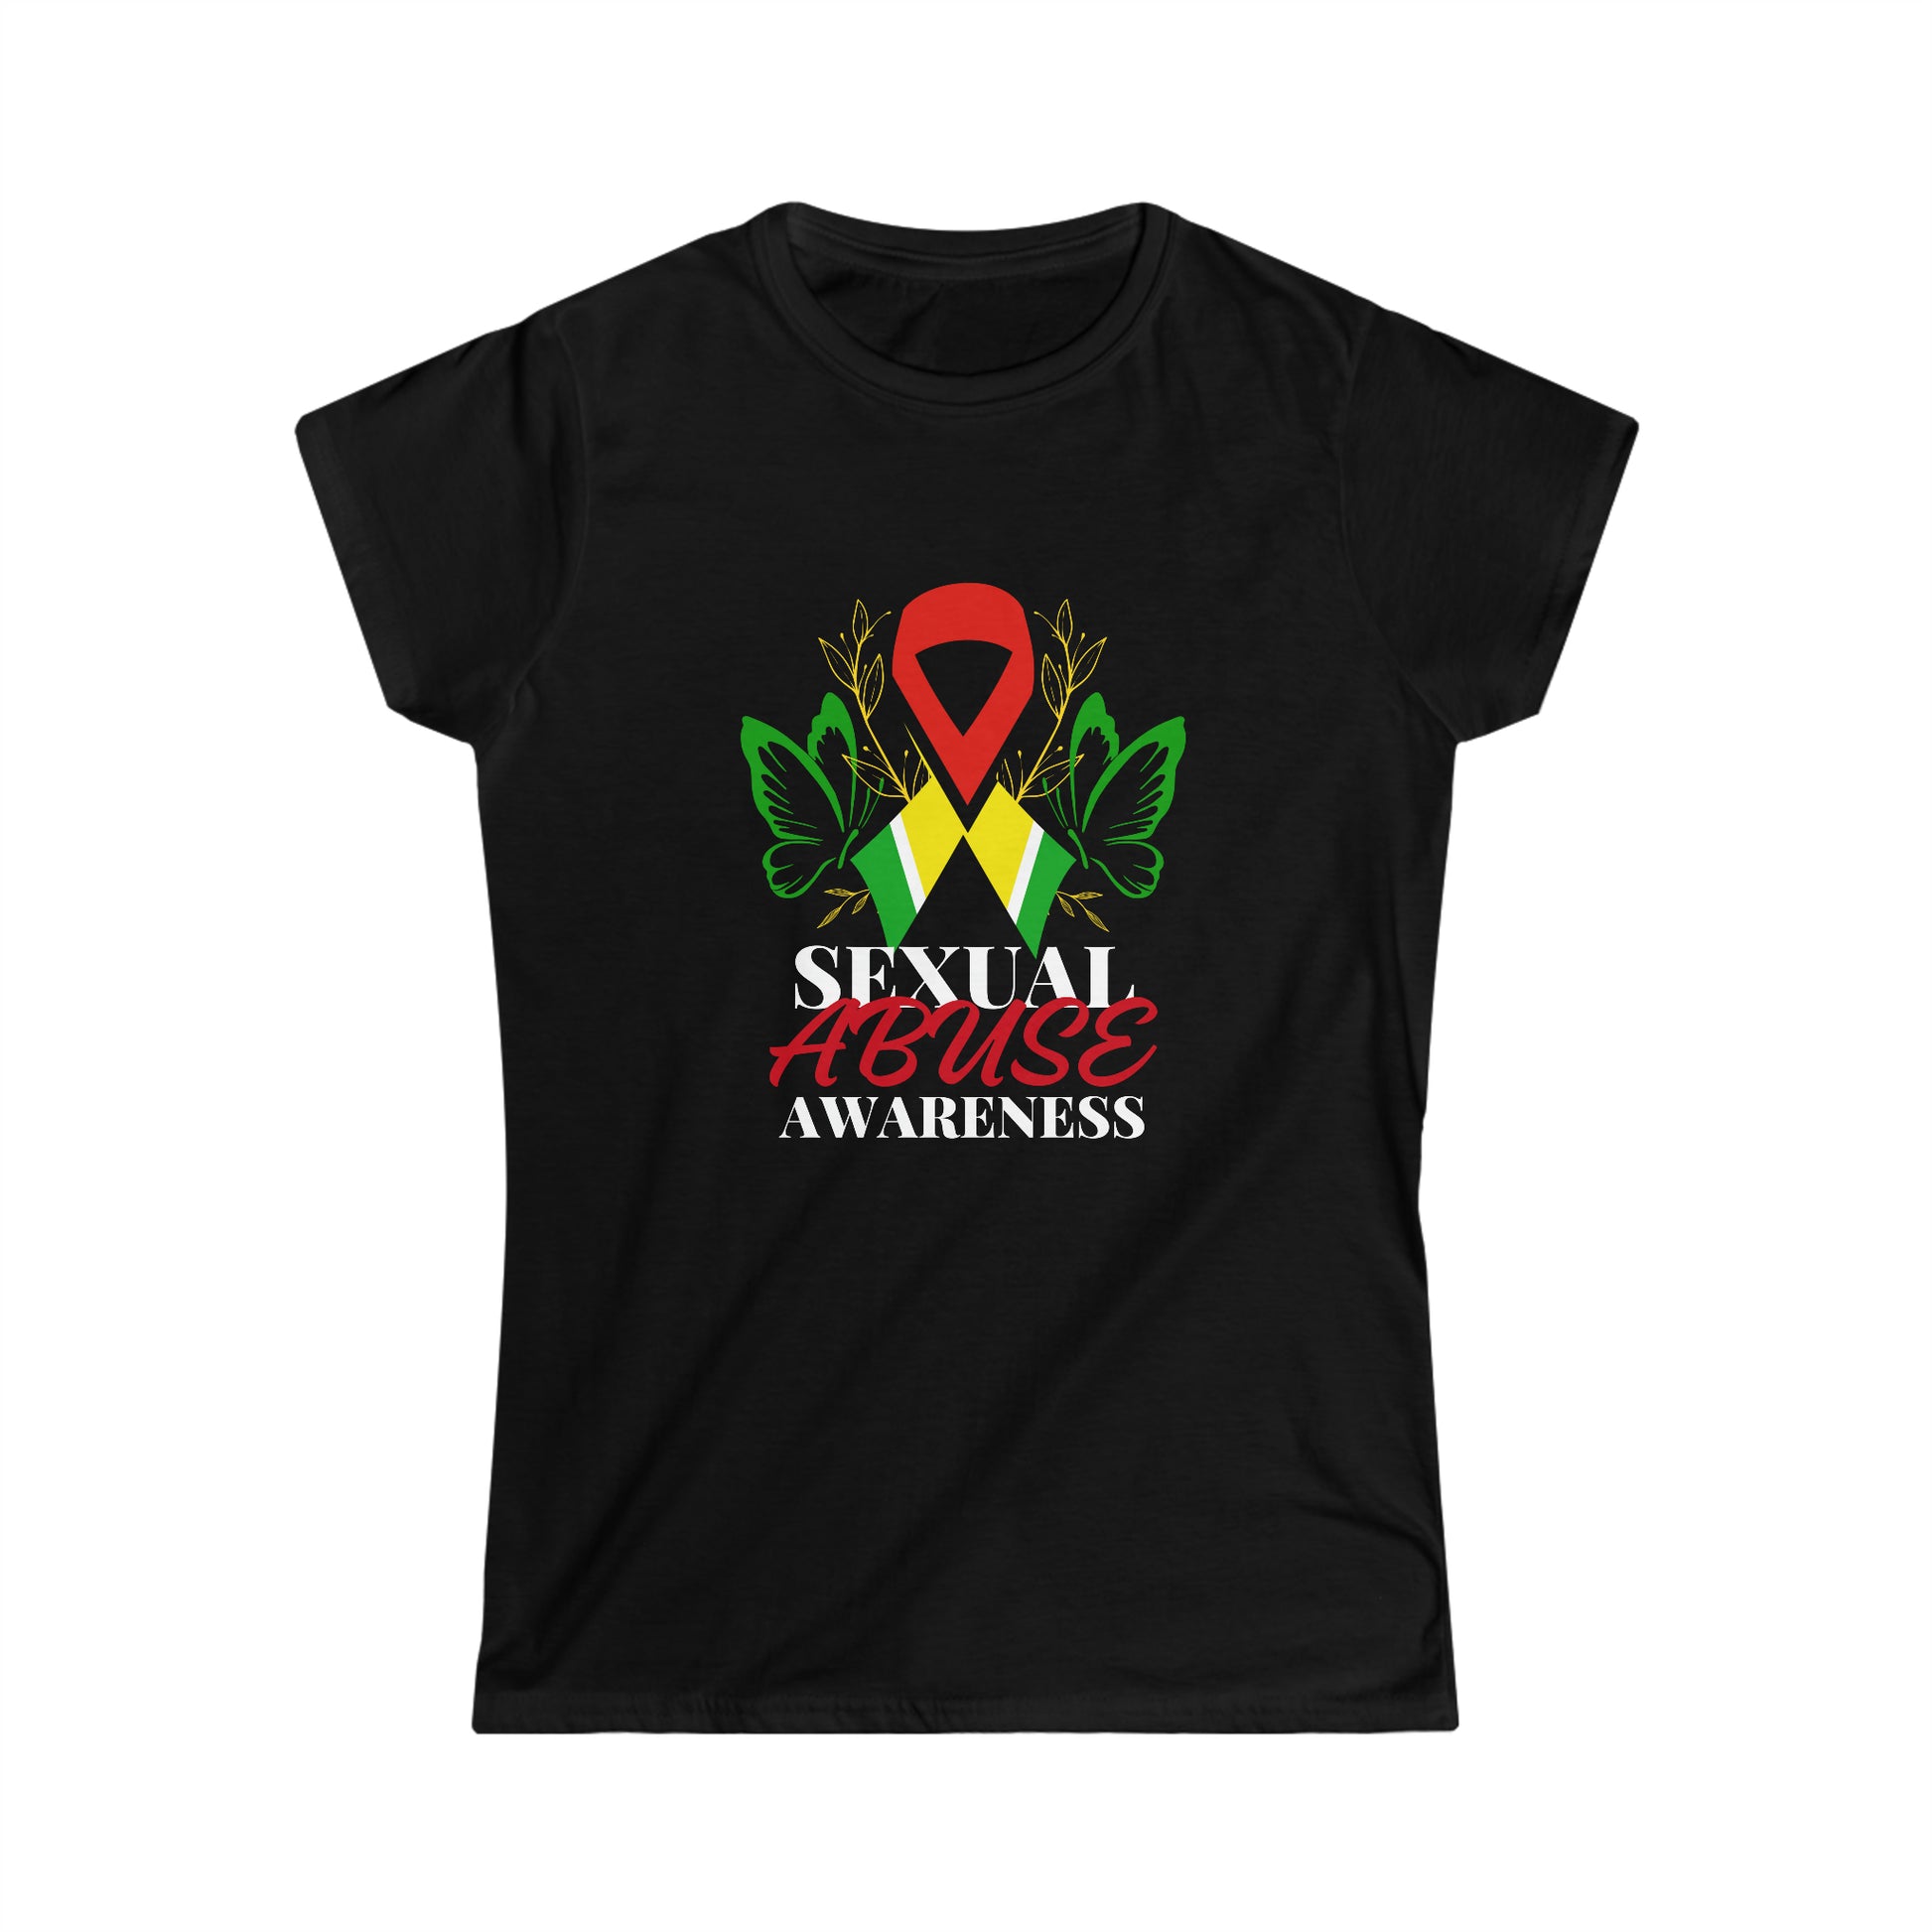 Guyanese Swag Sexual Abuse Awareness Women's Softstyle Tee